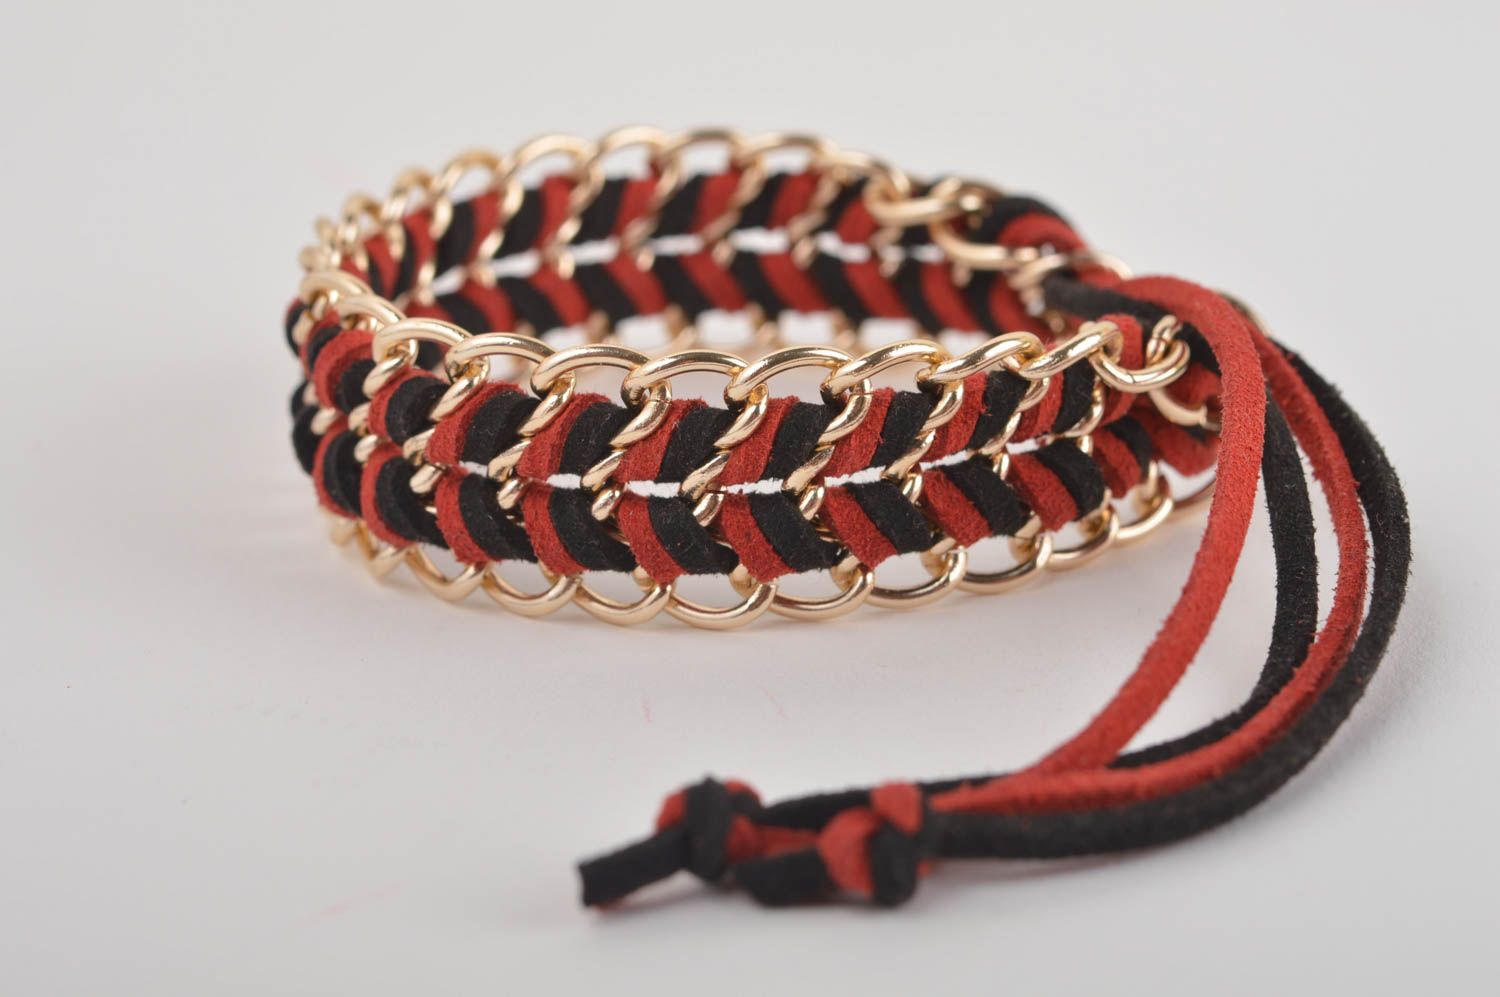 Chain bracelet handmade leather jewelry leather goods fashion accessories photo 3